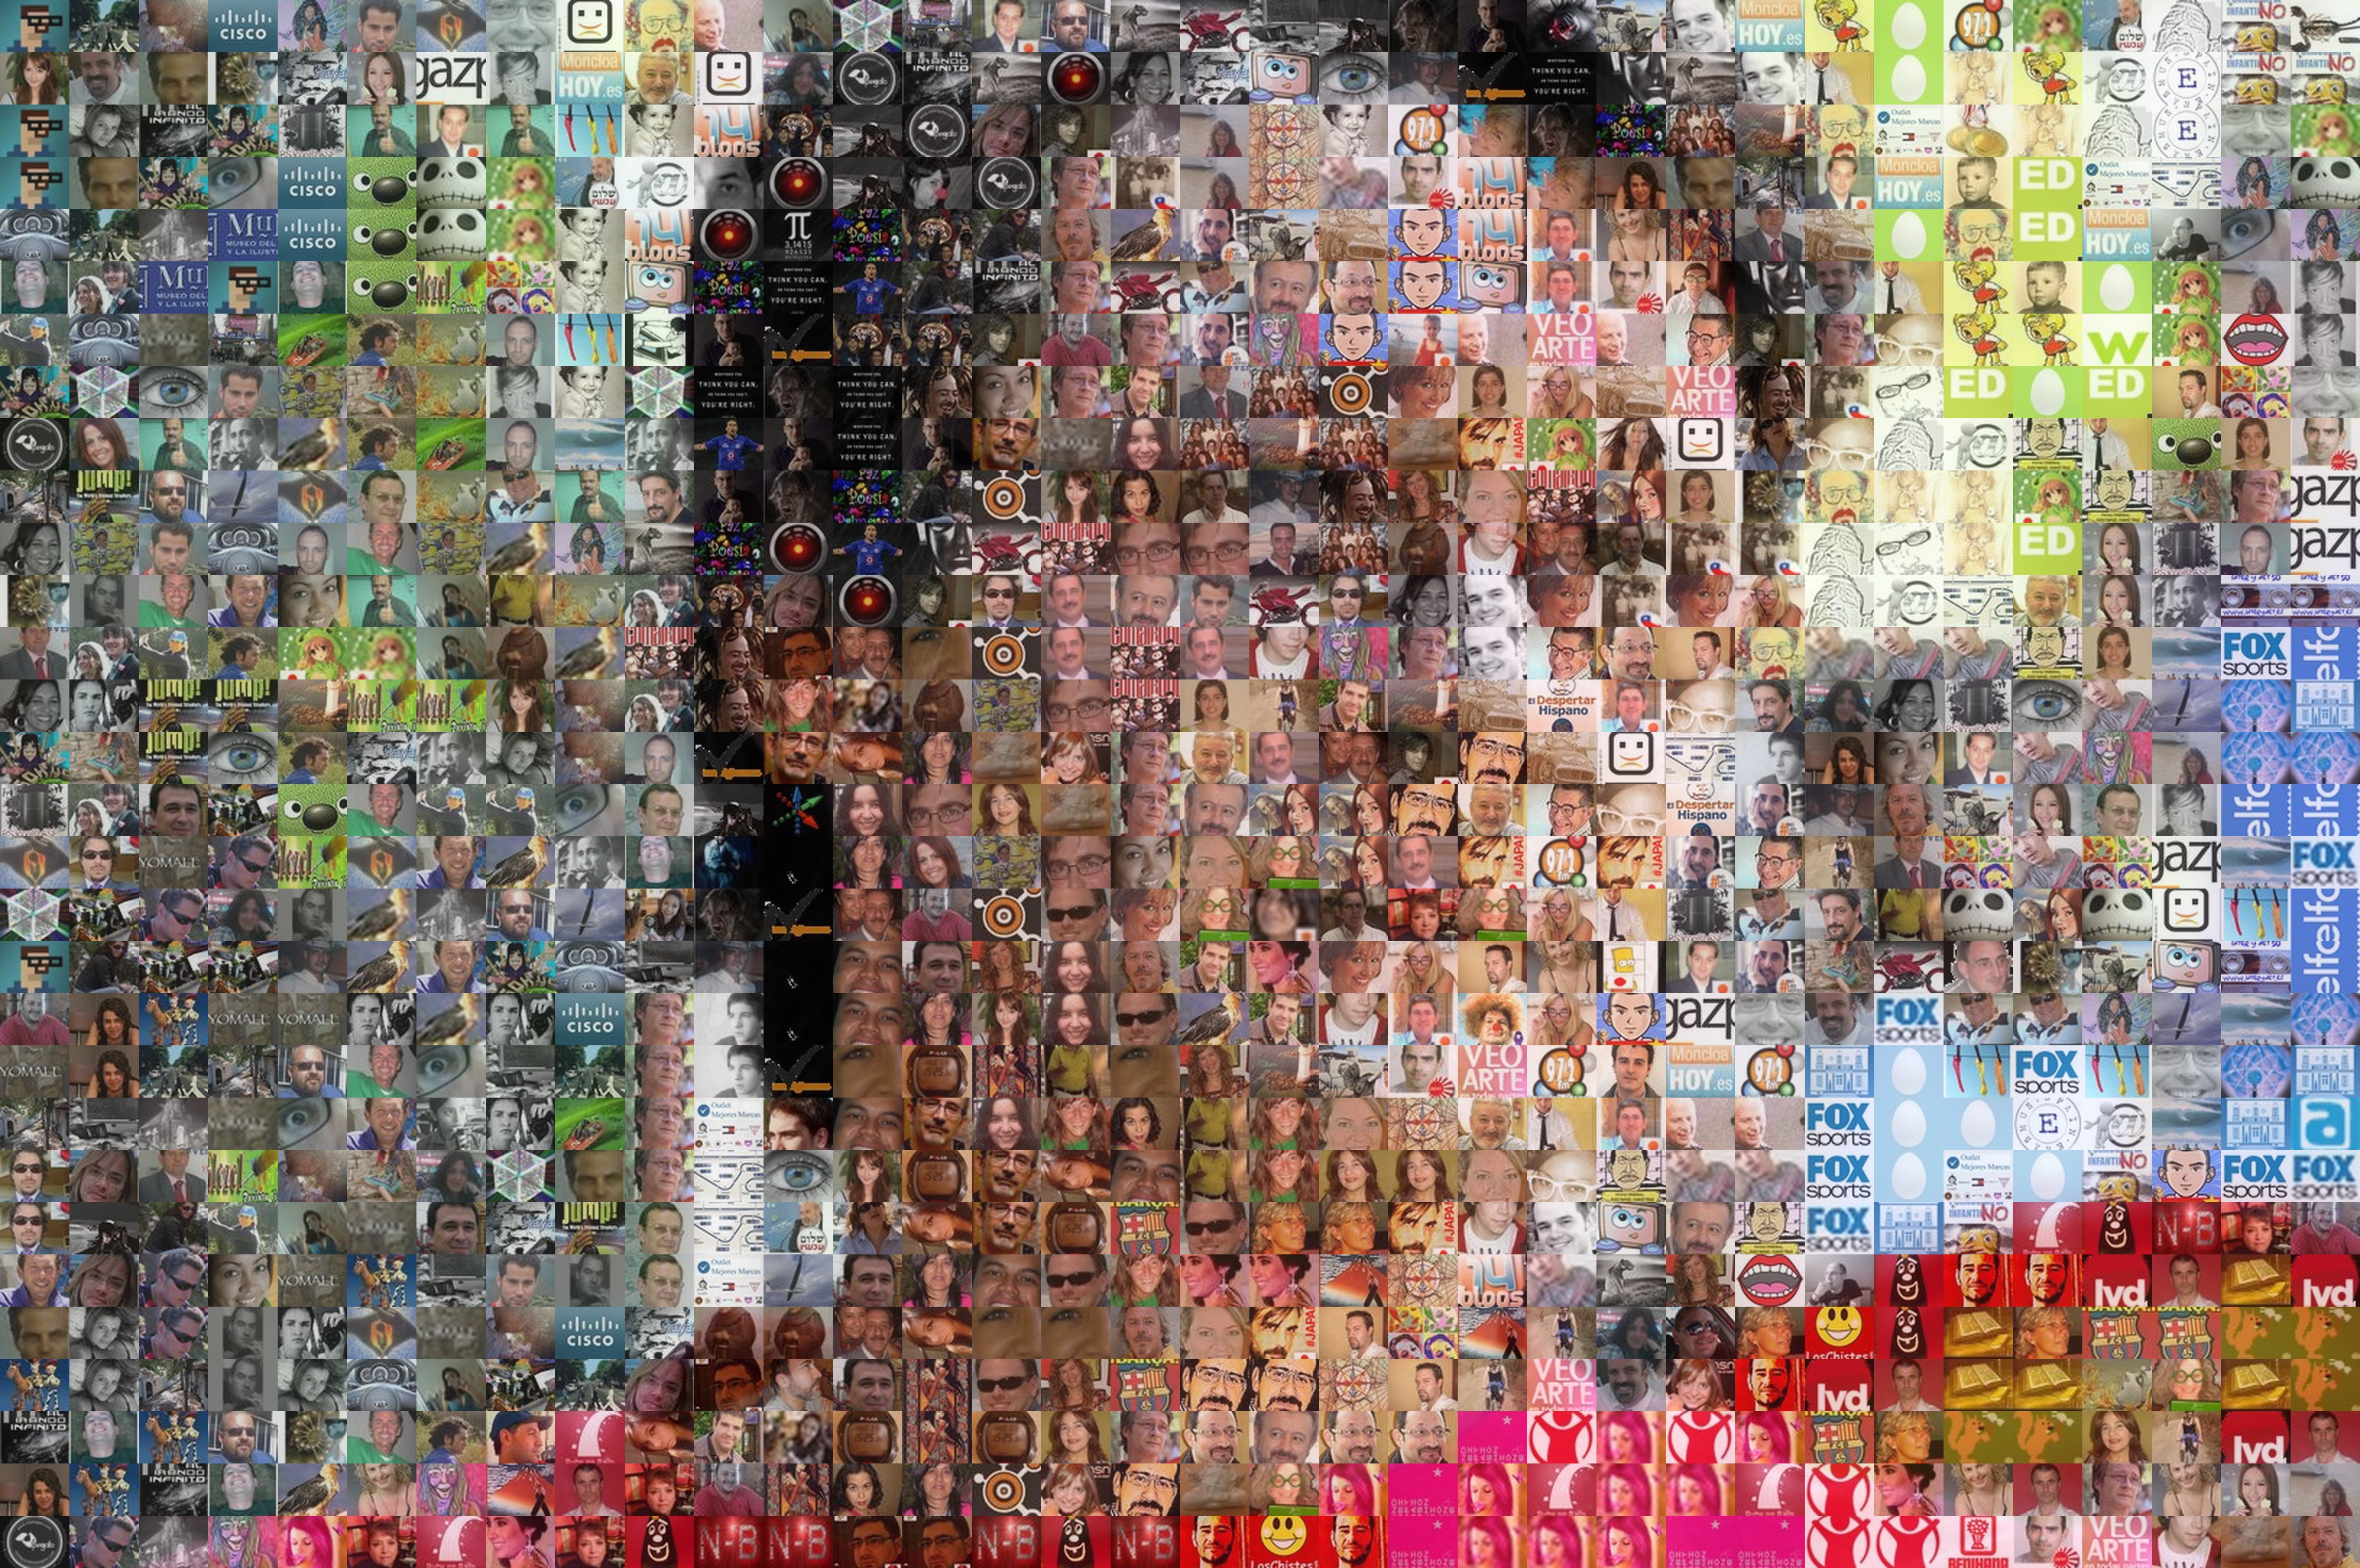 How to make a photo mosaic with images? [Foto-Mosaik] – Graphic PIZiadas